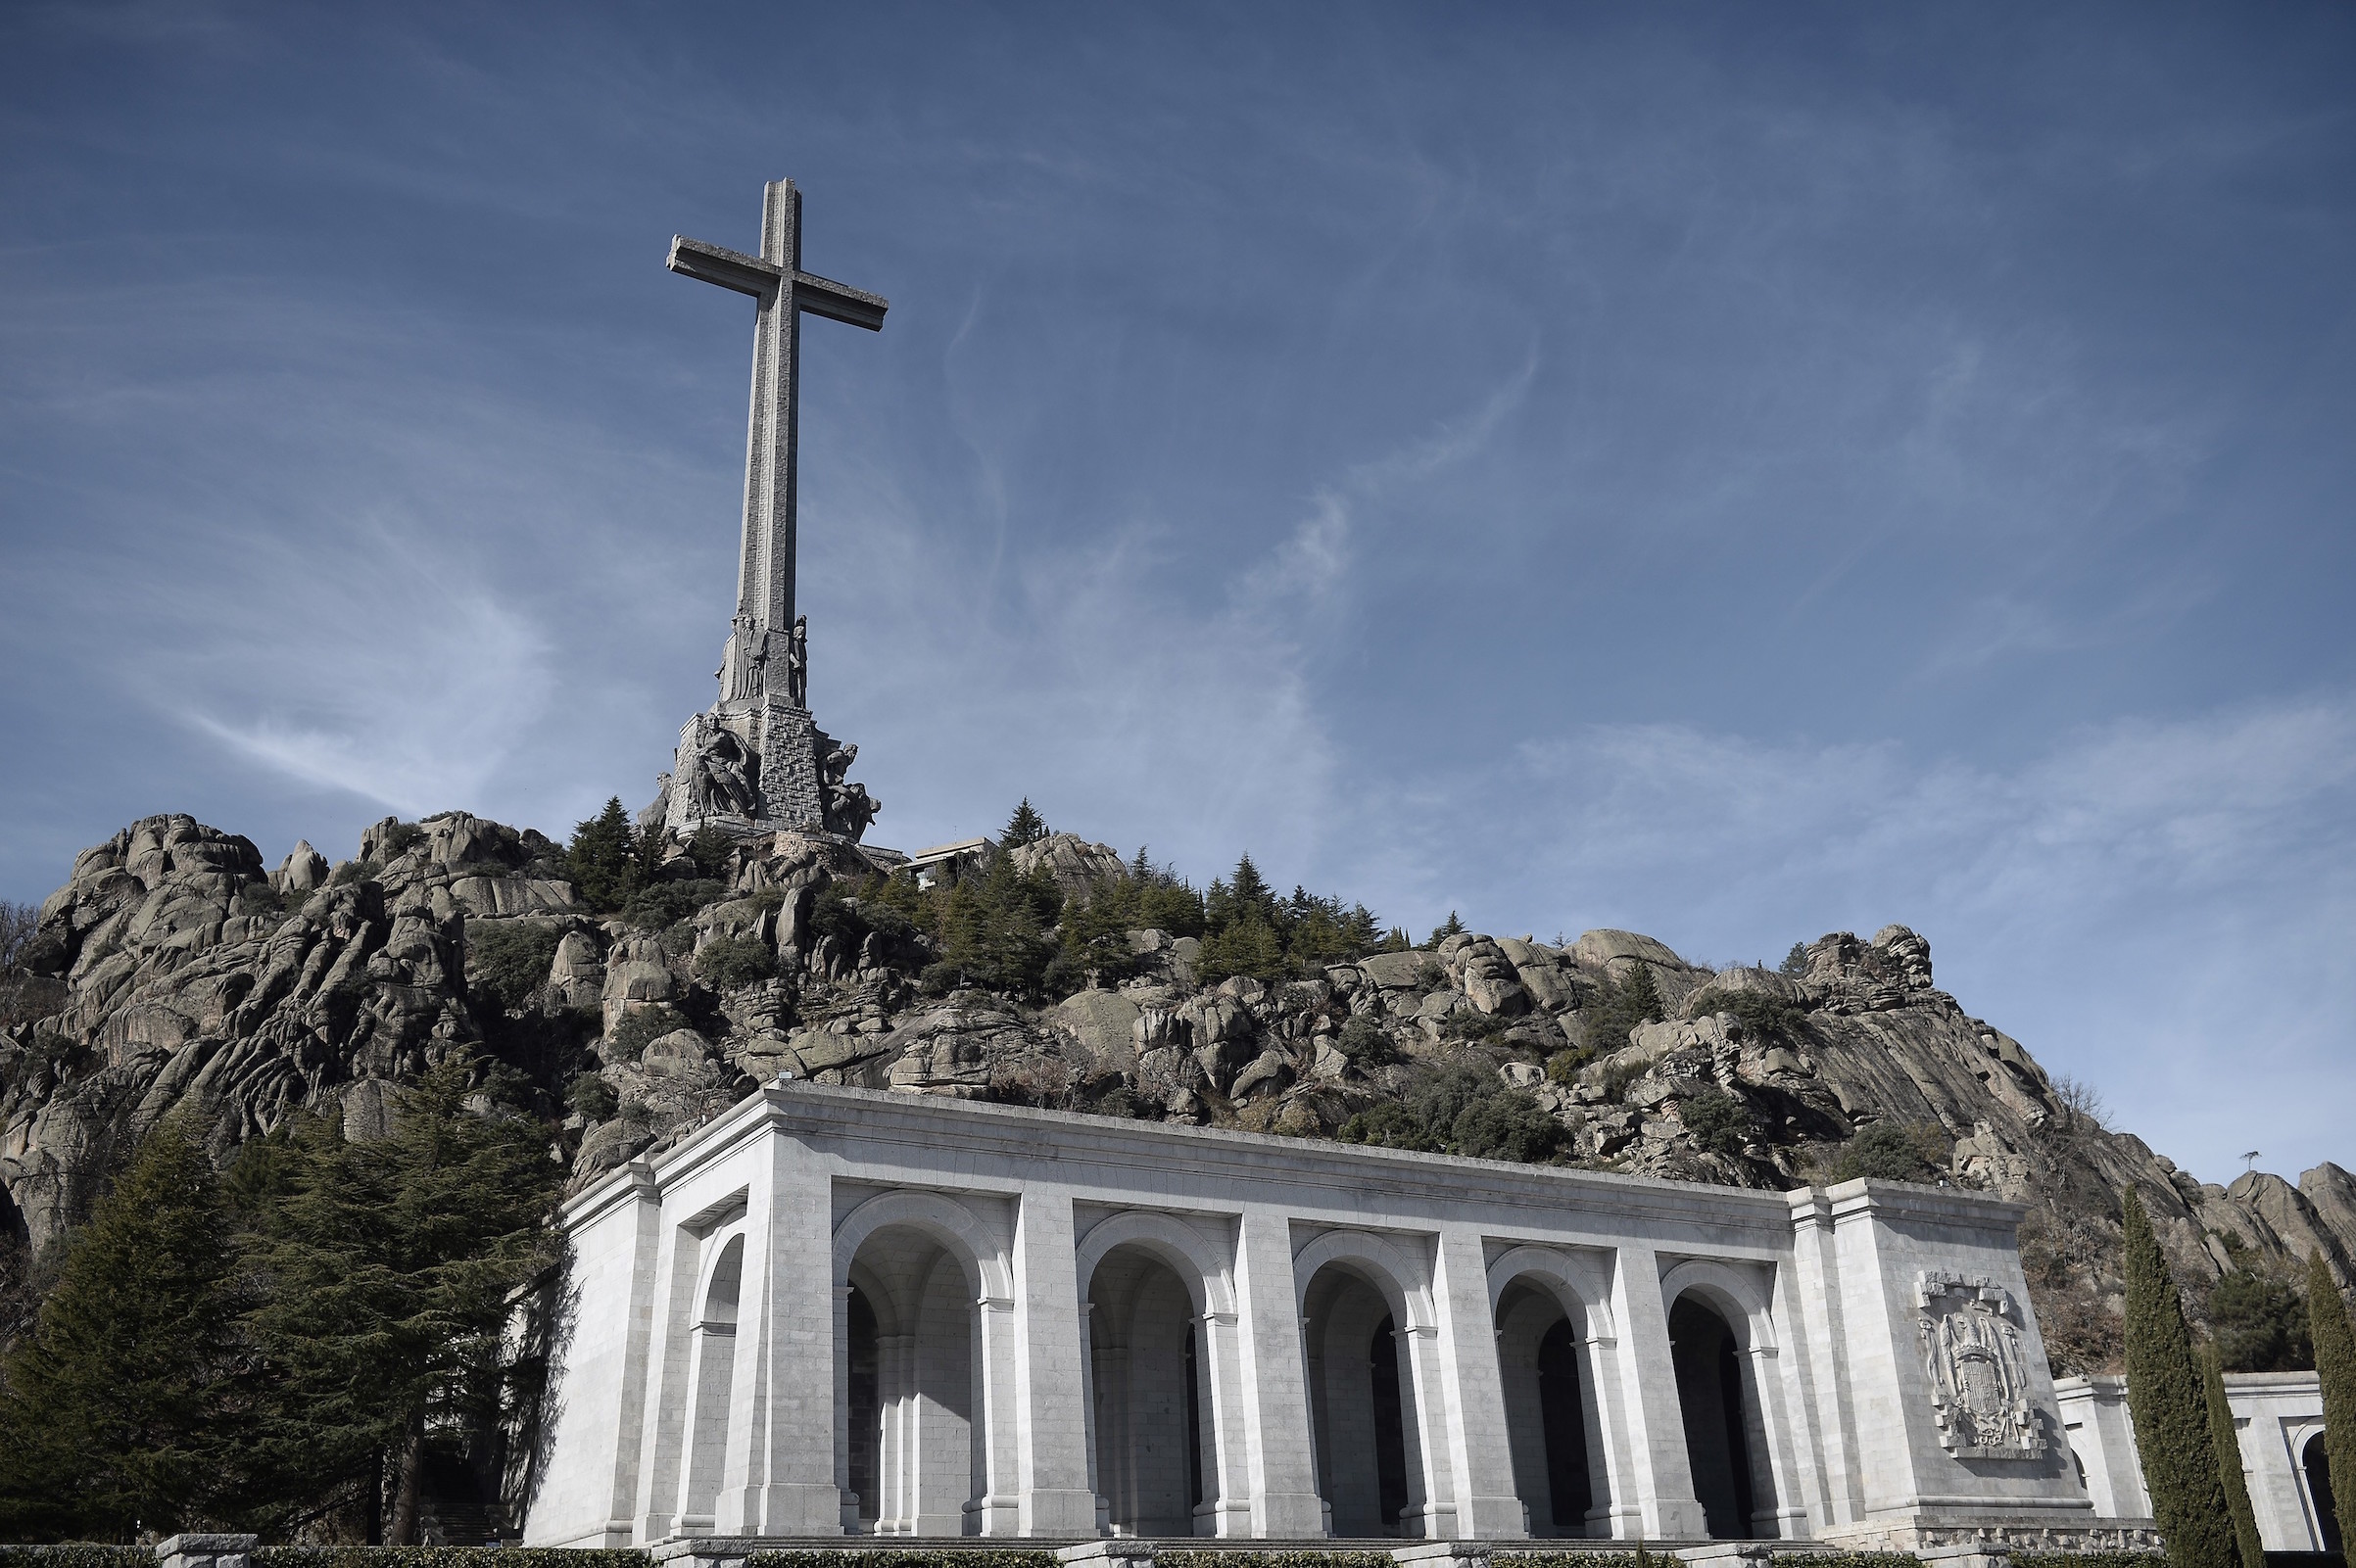 The Valley of the Fallen, in Madrid on Nov. 20, 2015. (Getty Images)